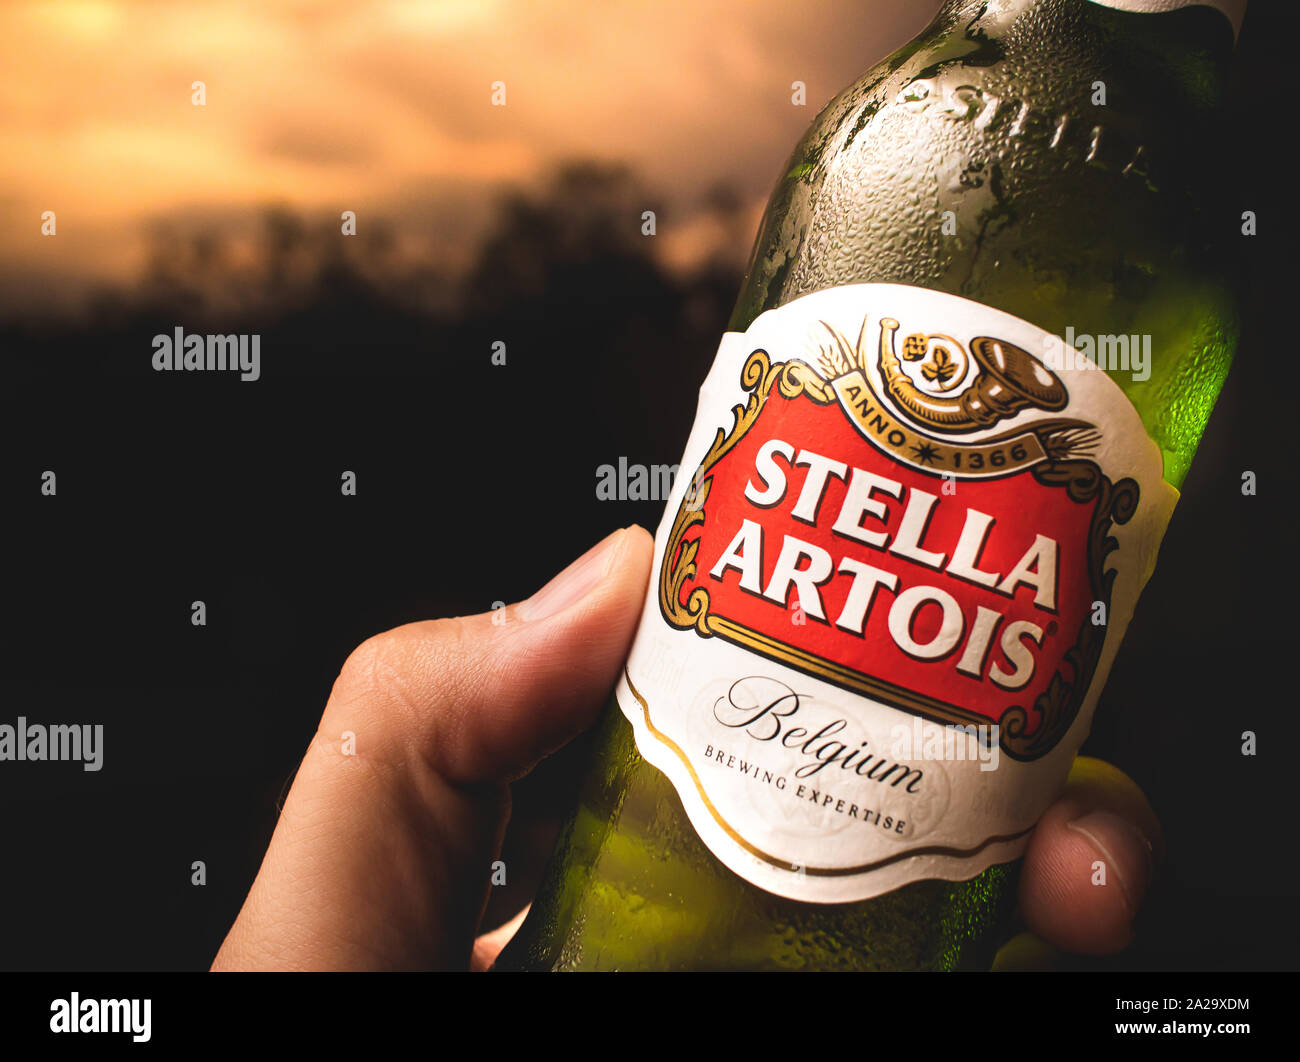 https://c8.alamy.com/comp/2A29XDM/photograph-of-a-man-holding-a-beer-bottle-from-belgian-company-stella-artois-2A29XDM.jpg